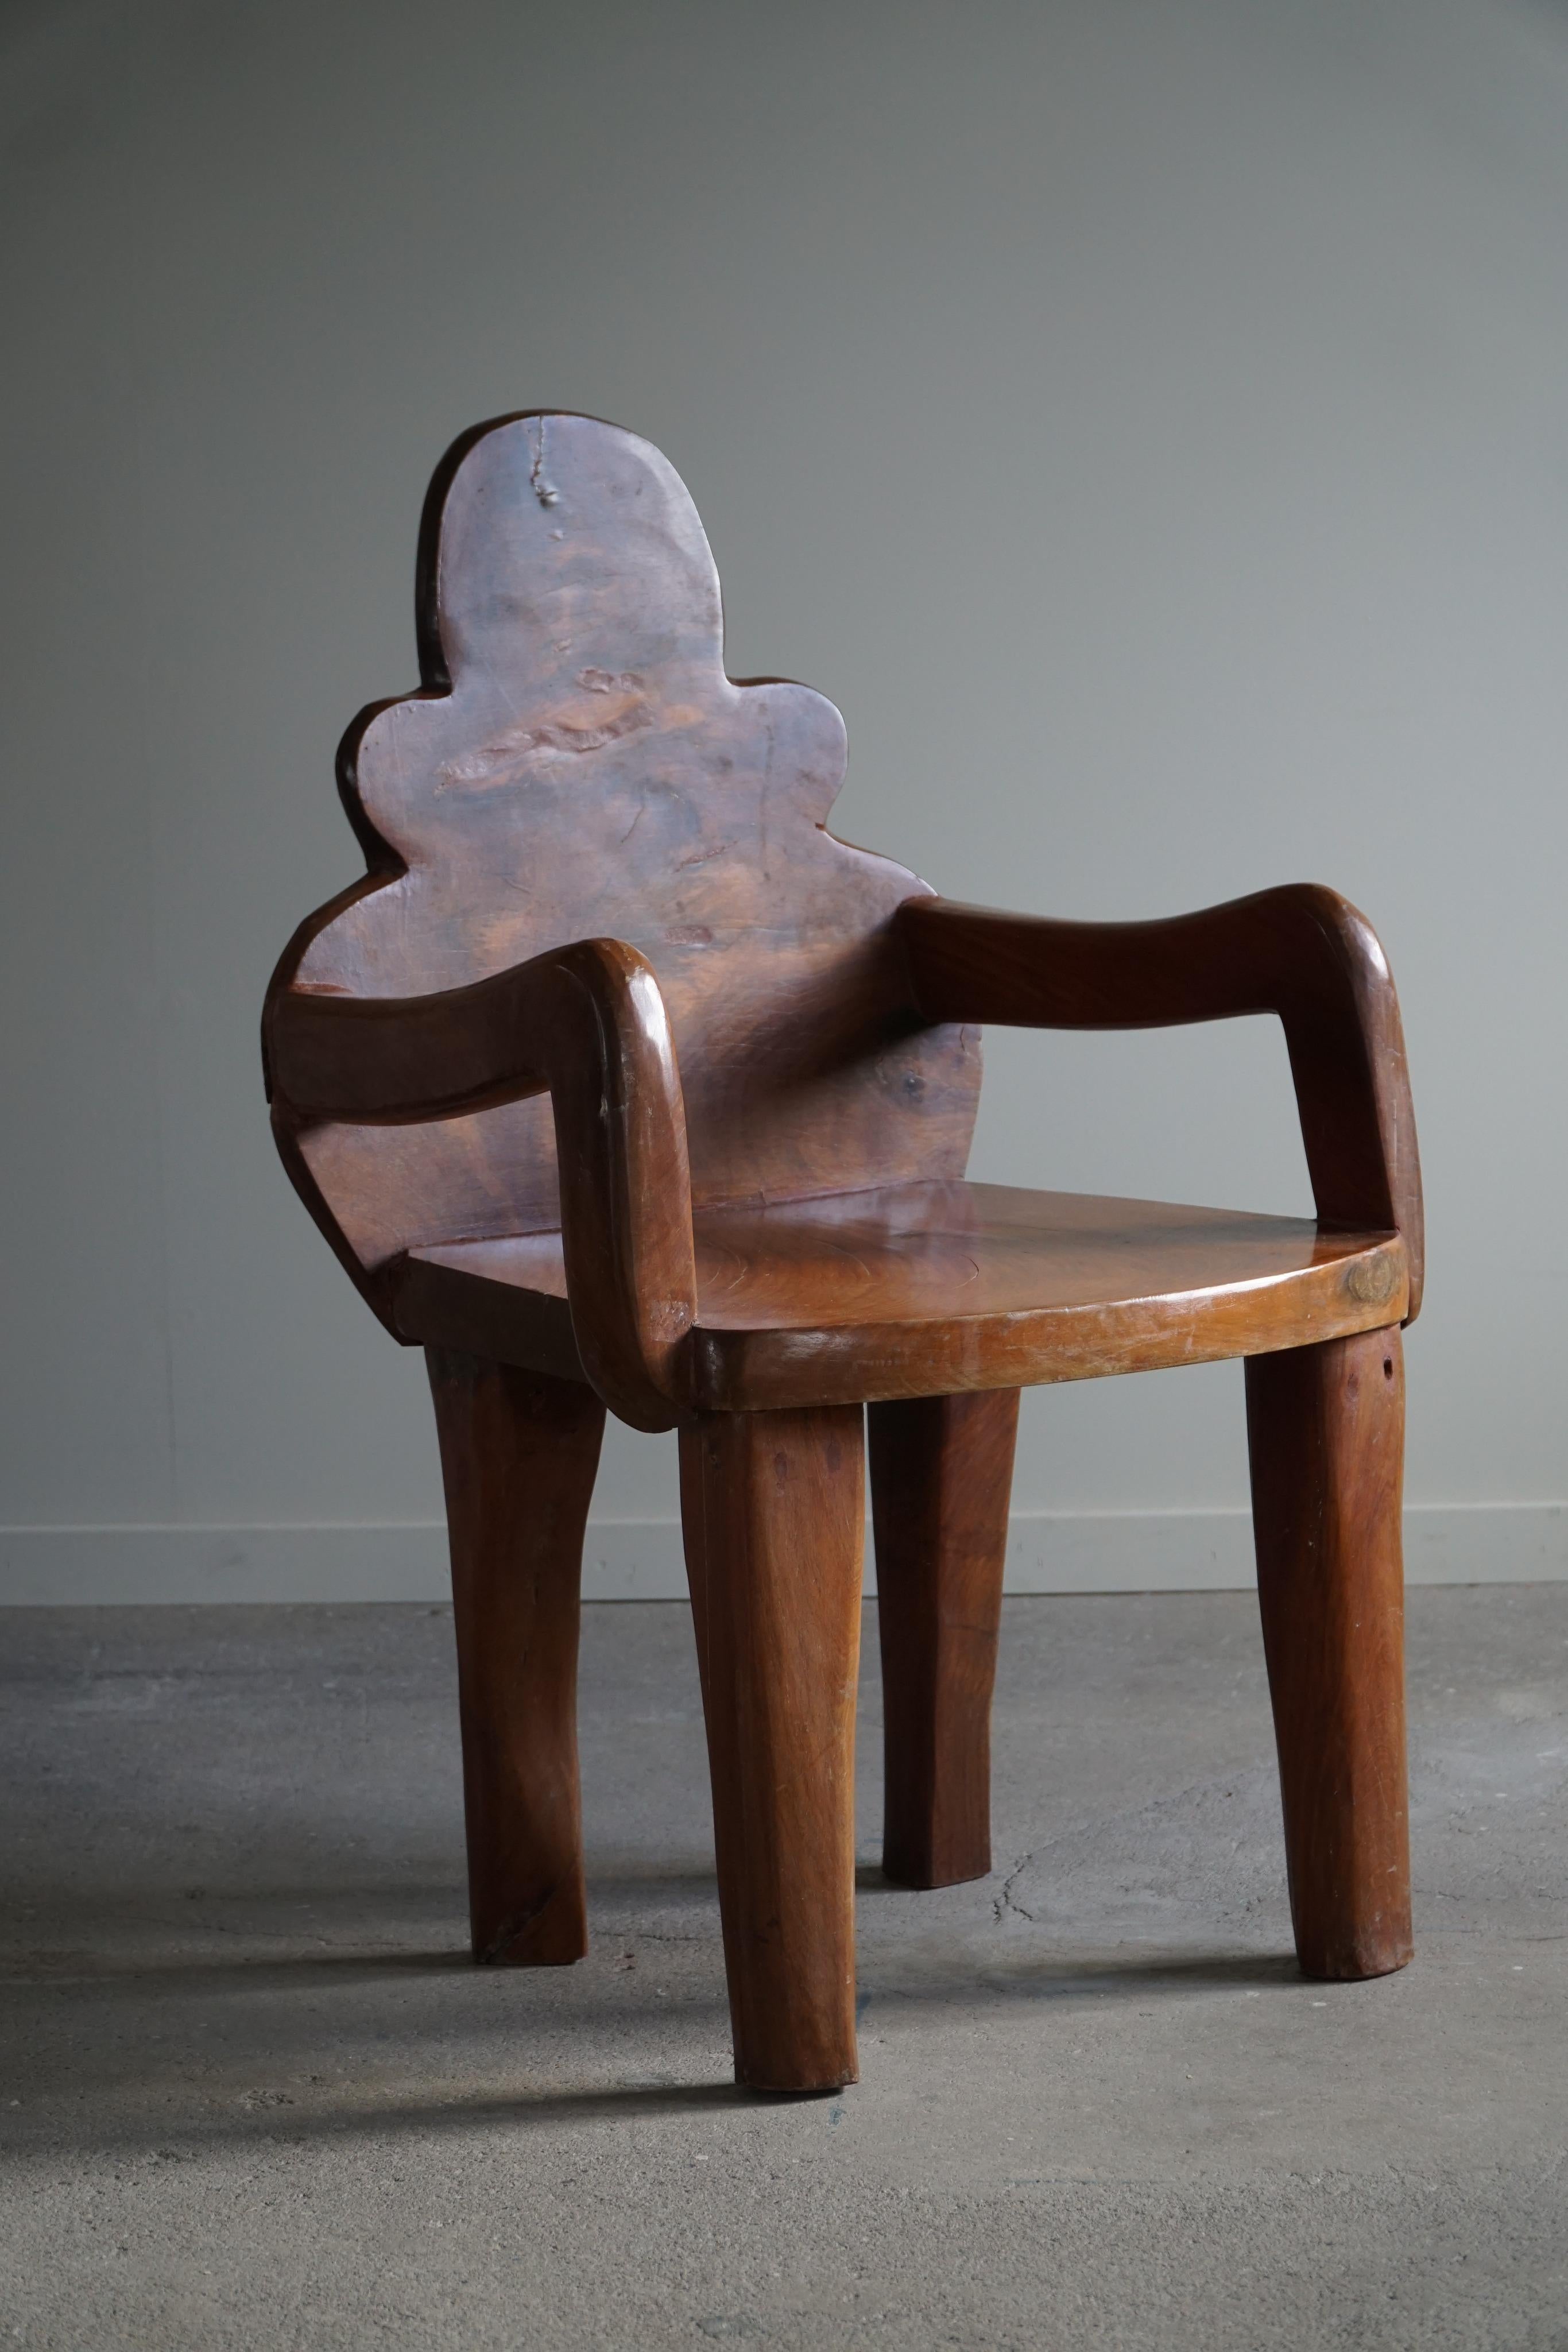 Organic Handcrafted Wabi Sabi Armchair in Solid Wood, Swedish Modern, 1900s In Good Condition For Sale In Odense, DK